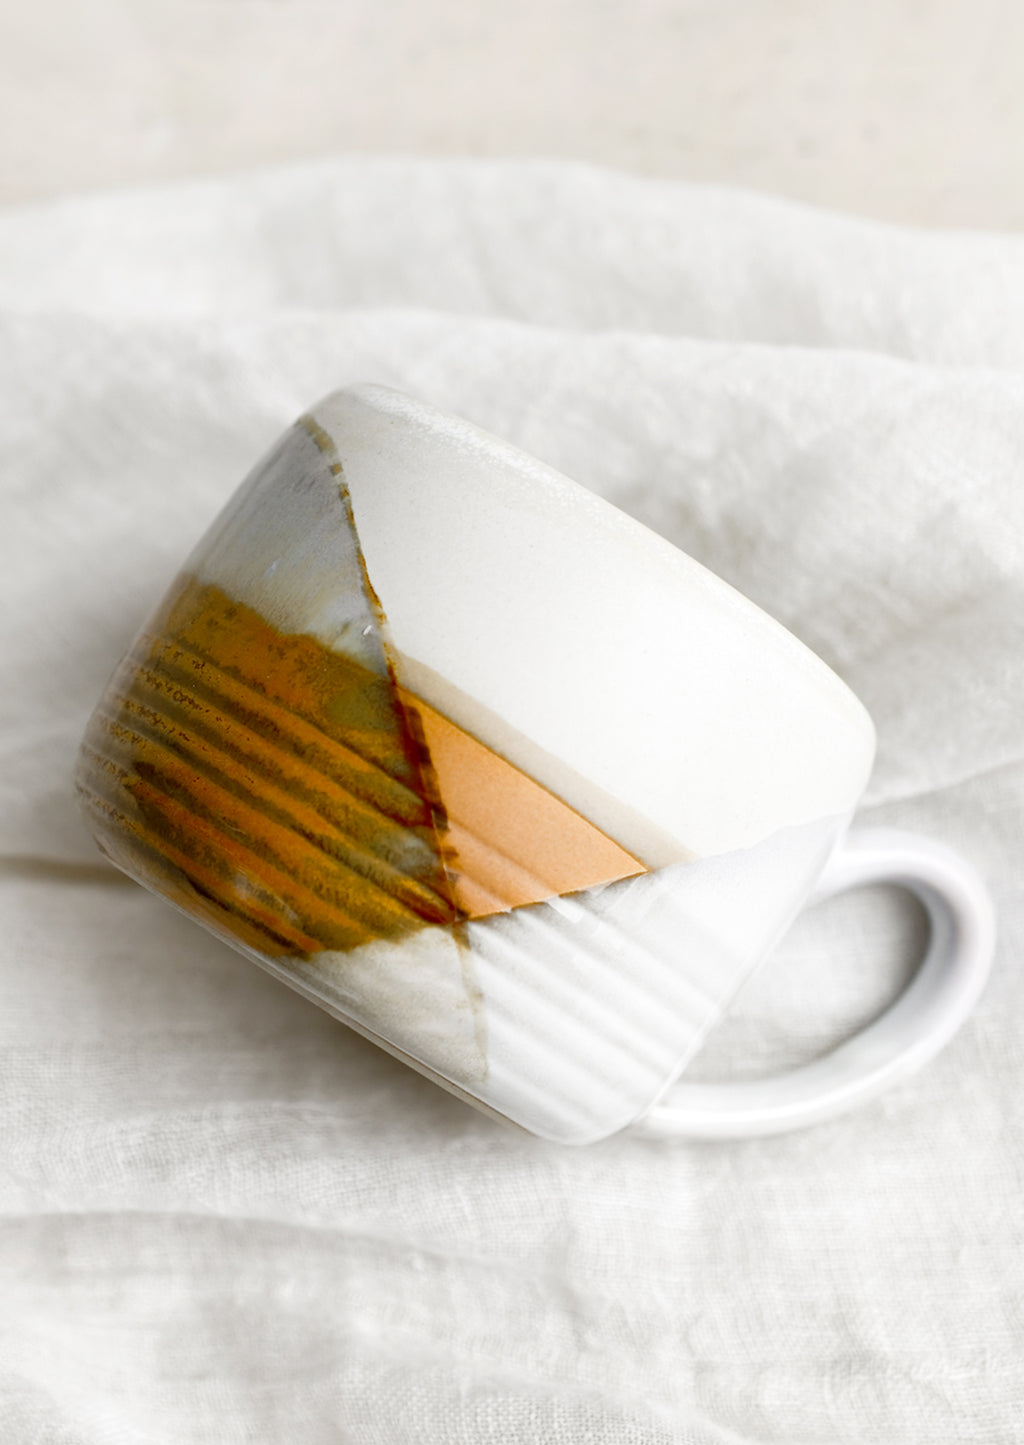 1: A mug with mix of brown and white glazes forming geometric pattern.